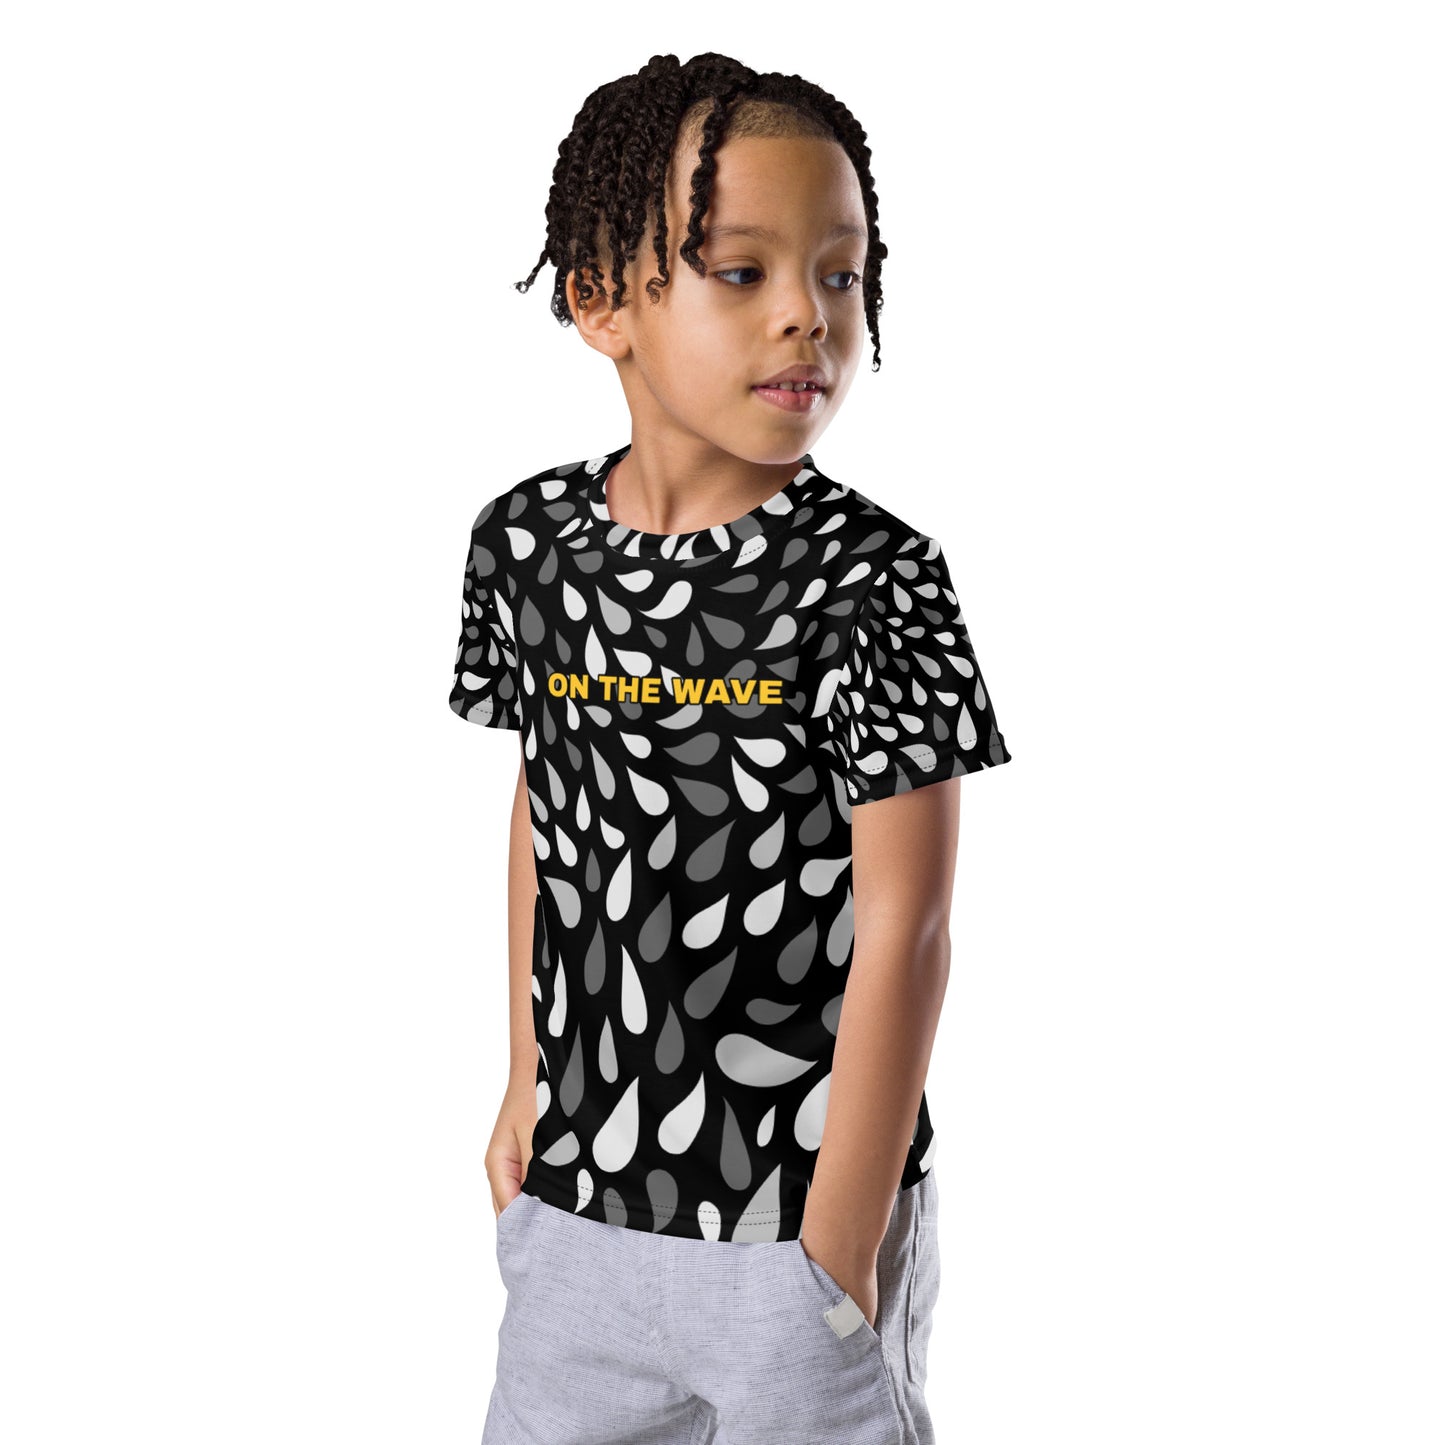 Kids on the wave crew neck t-shirt